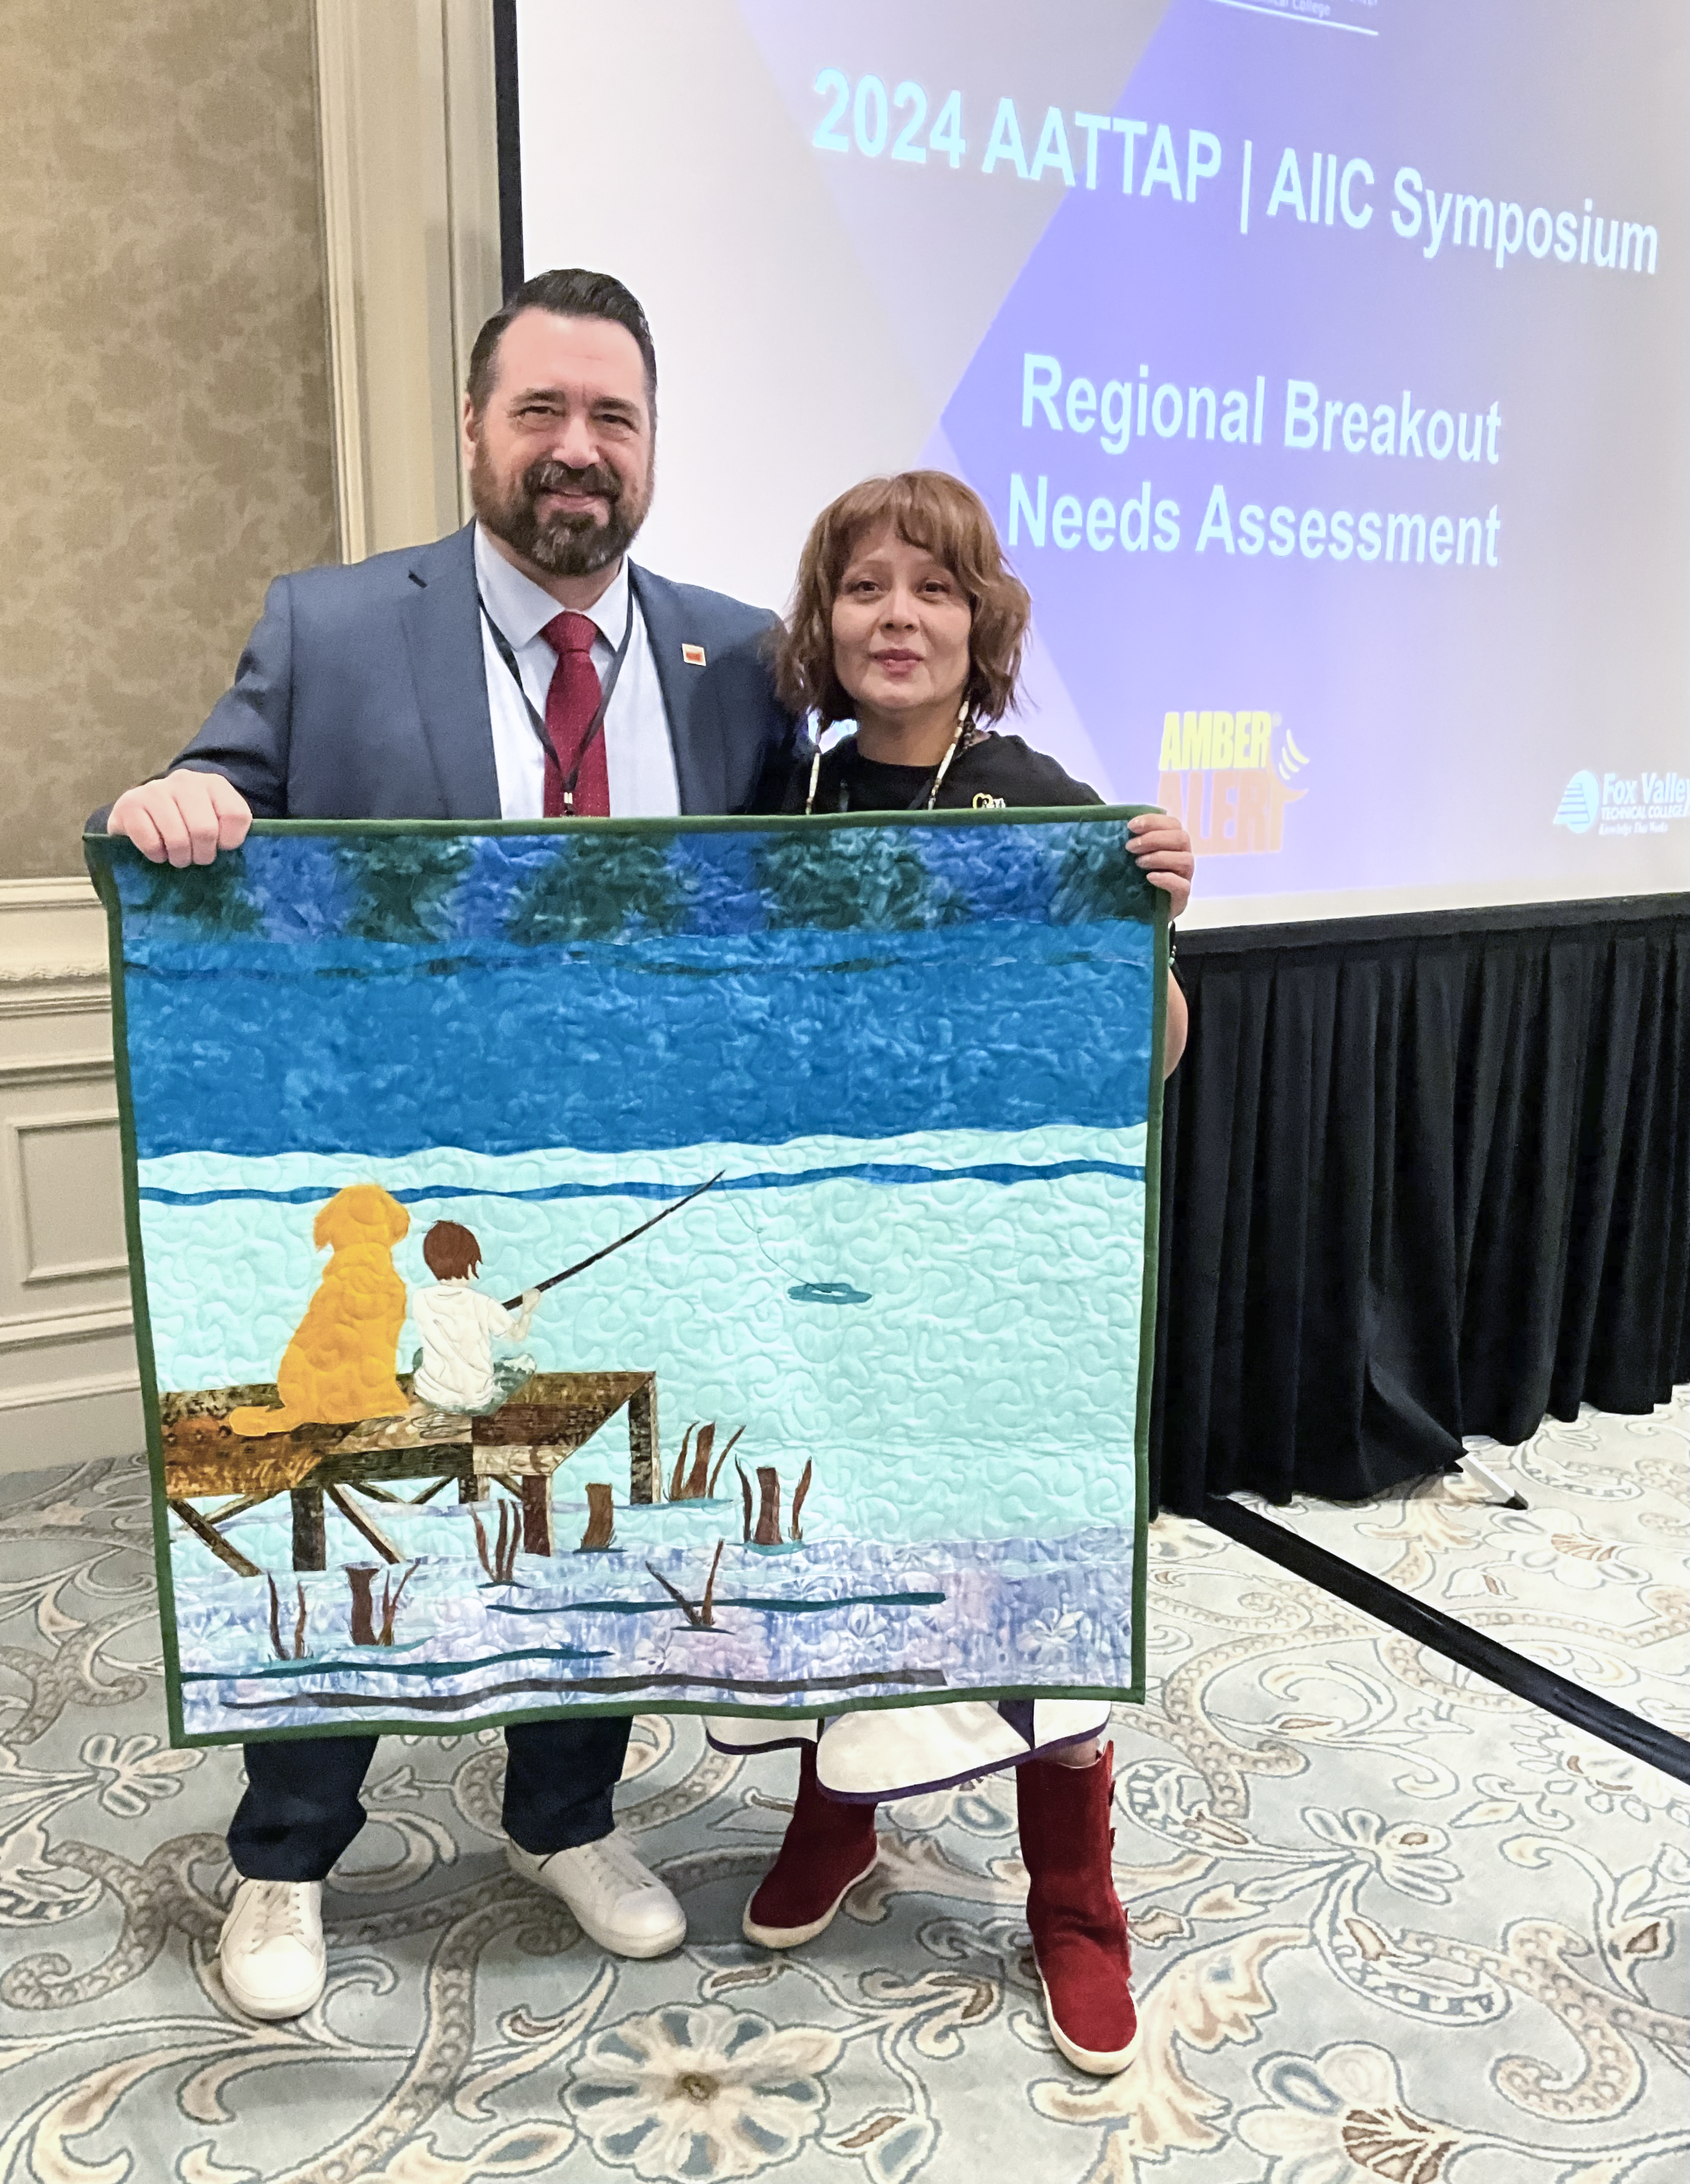 Image showing Derek VanLuchene and Pamela Foster holding a memorial quilt she made for him in tribute to his late brother and dog.